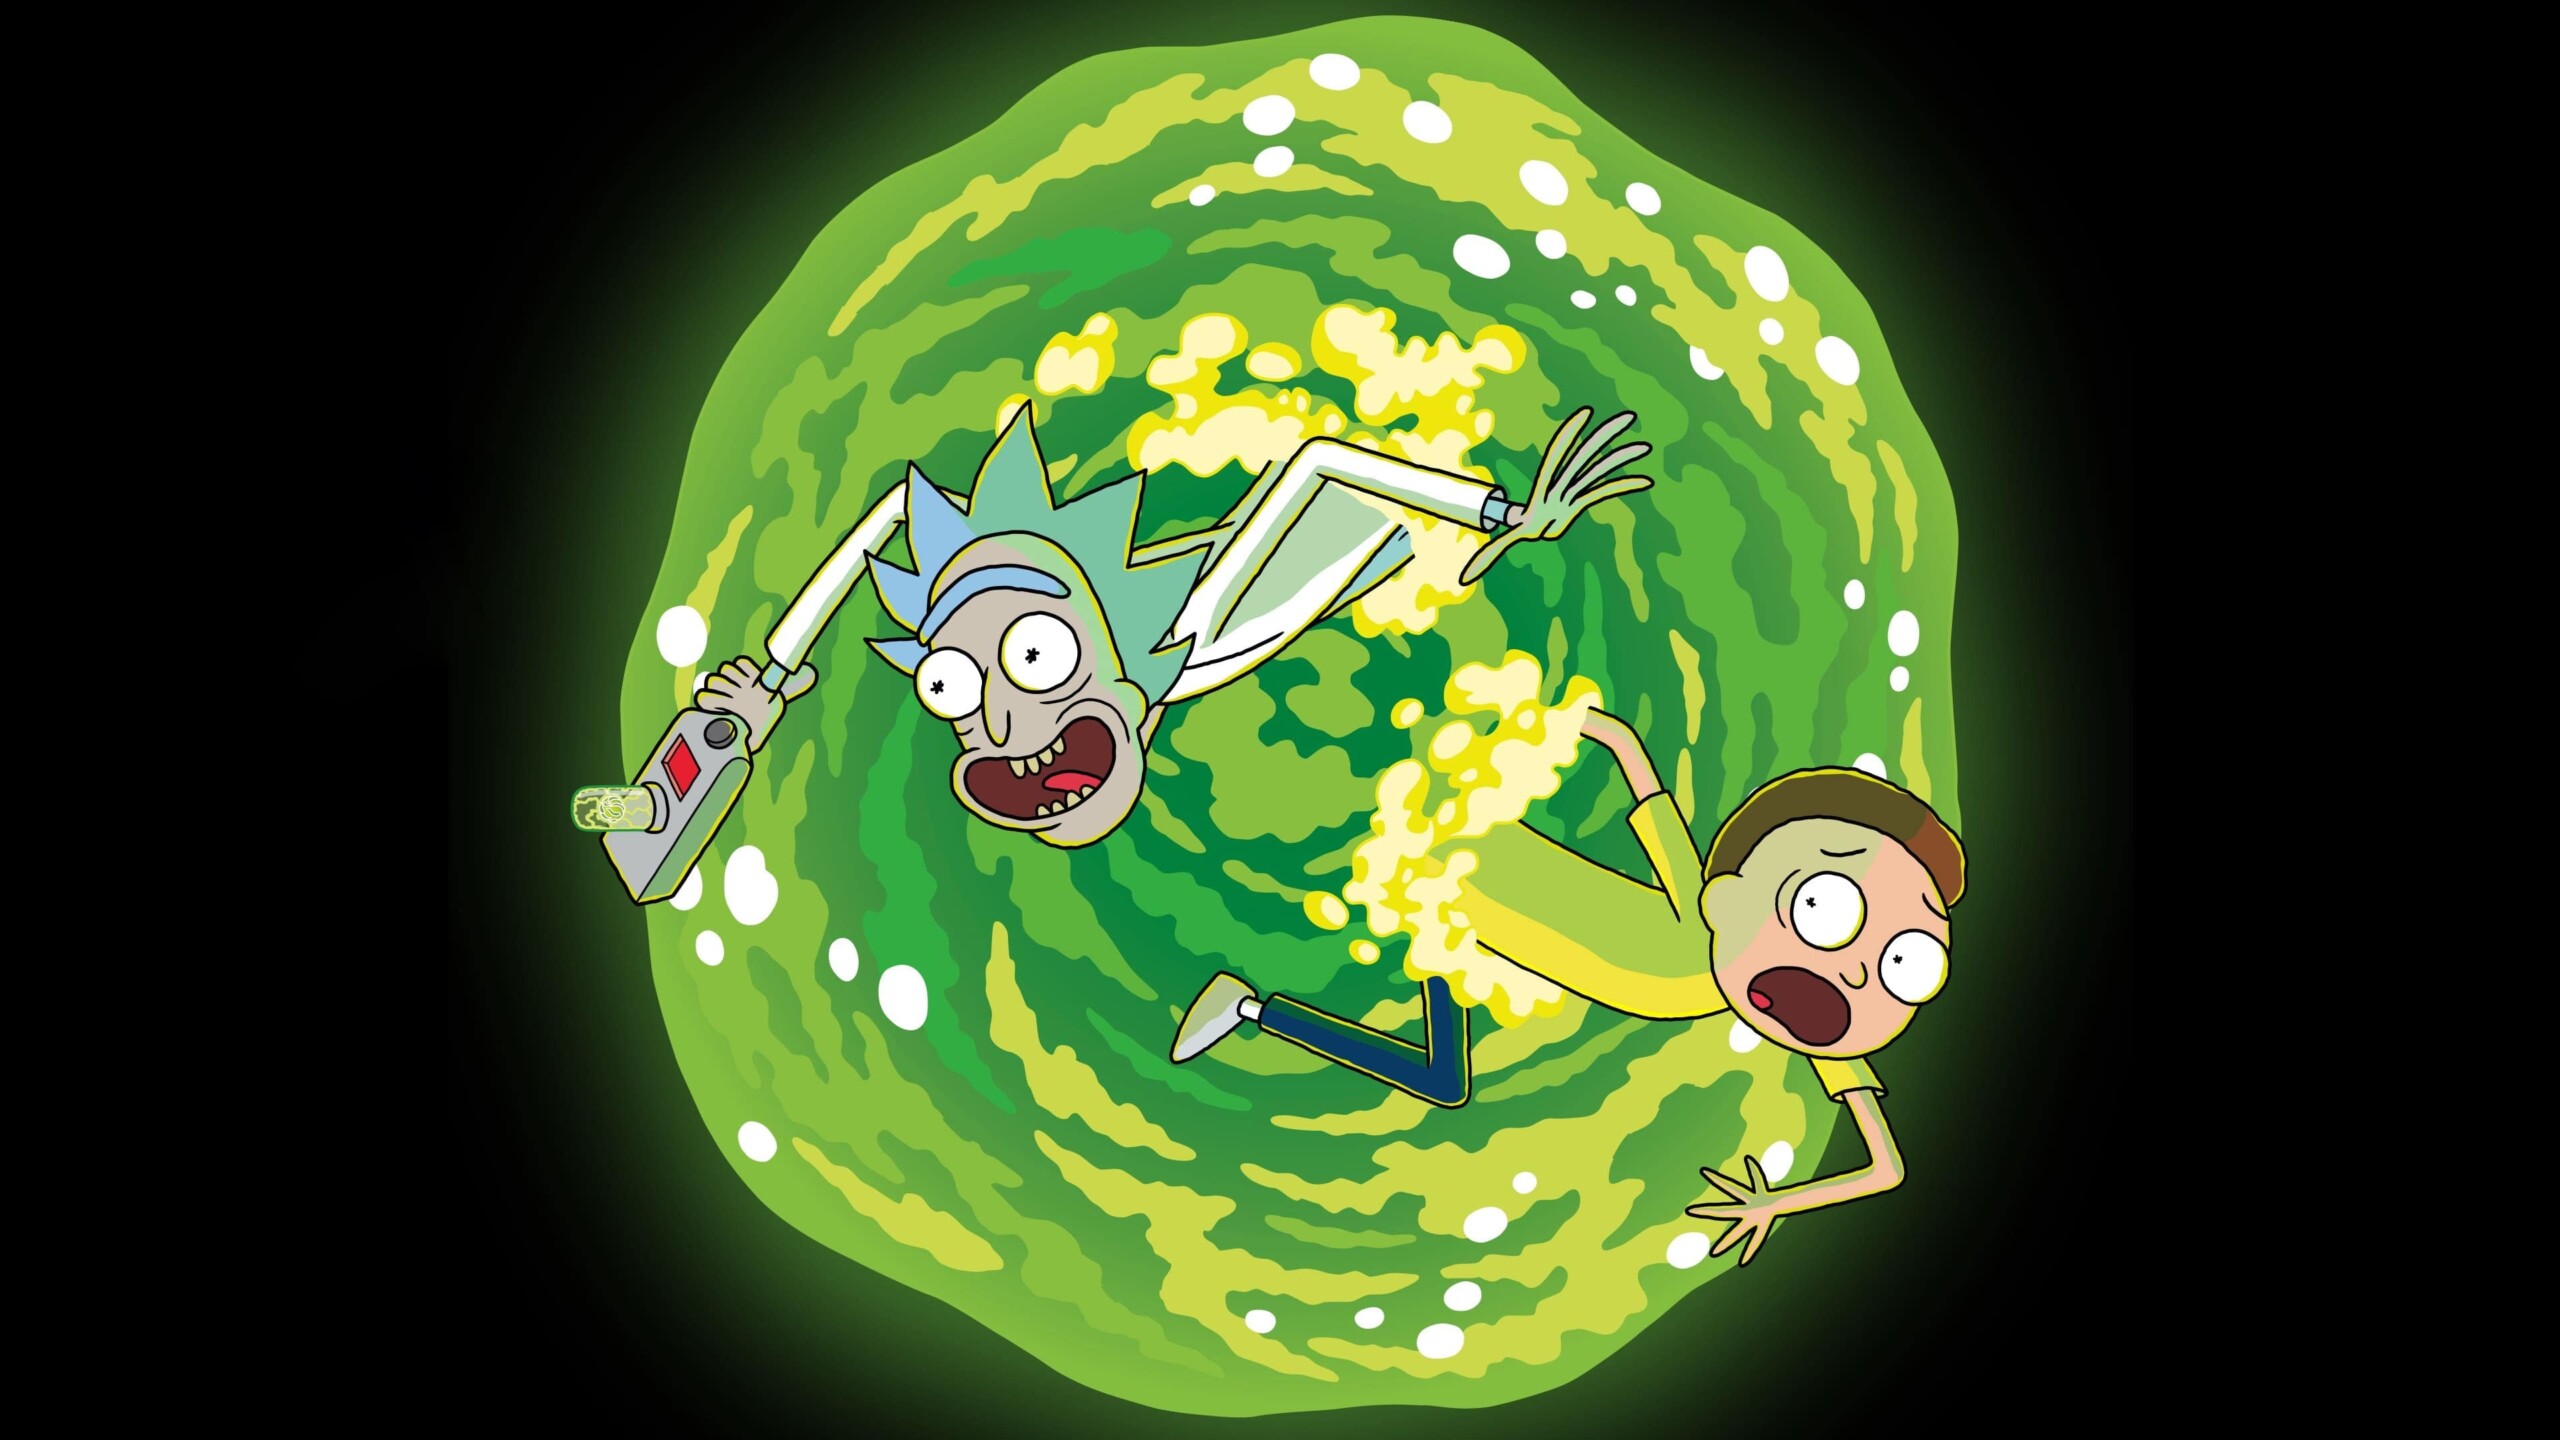 Rick and Morty Wallpapers HD Rick and Morty Backgrounds Free Images  Download